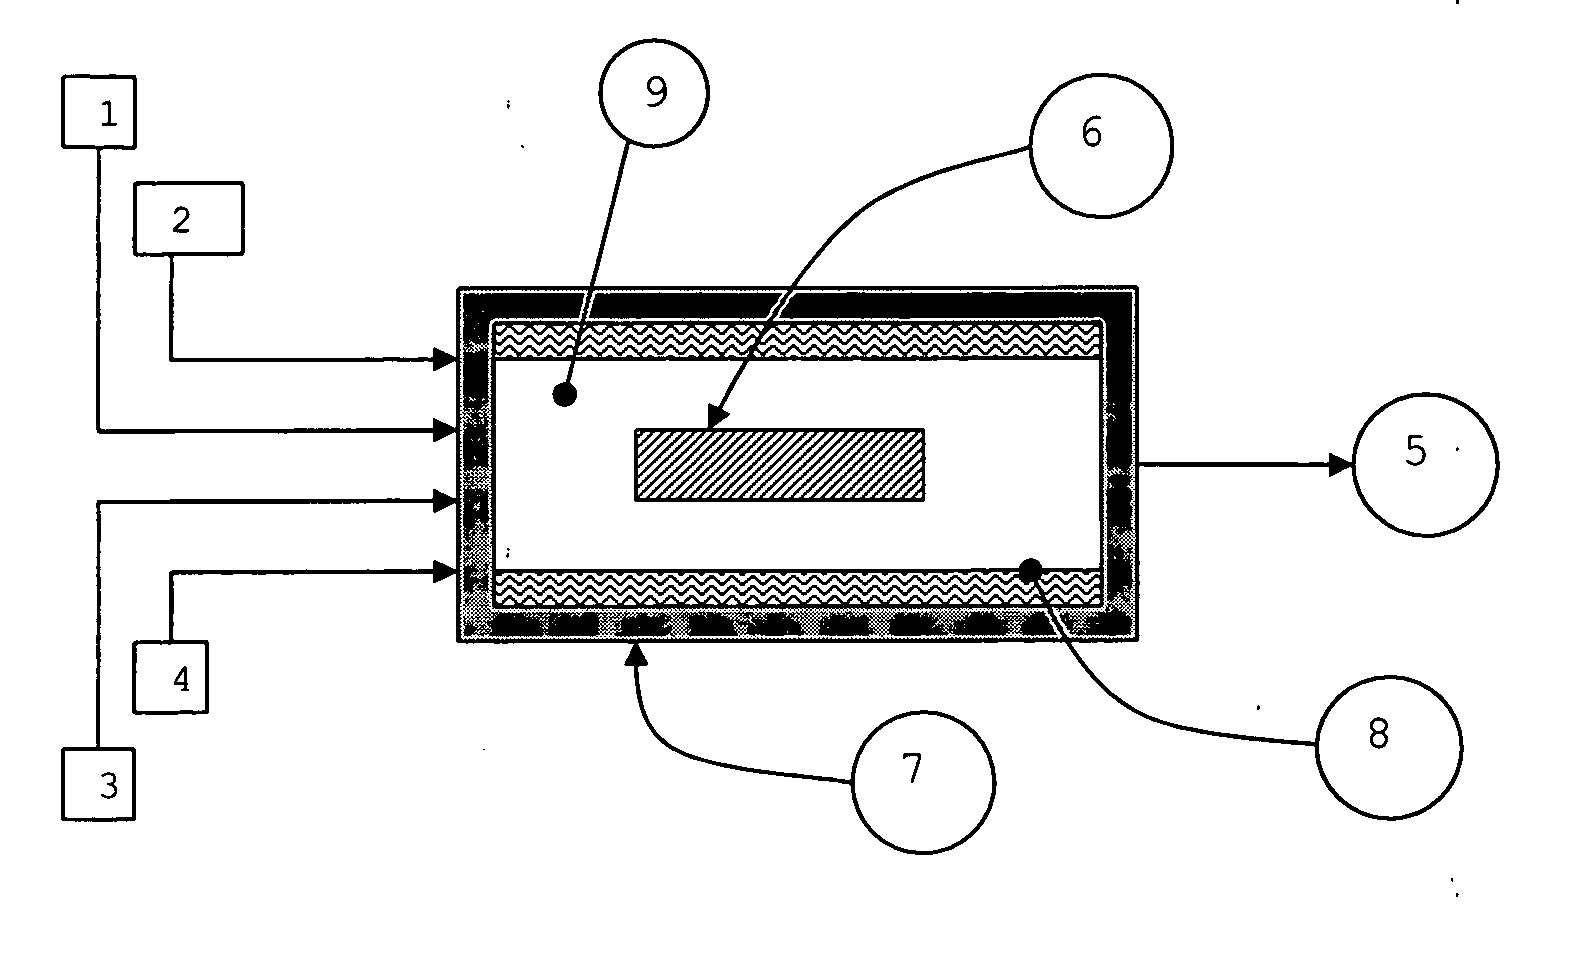 Nanotube/metal substrate composites and methods for producing such composites